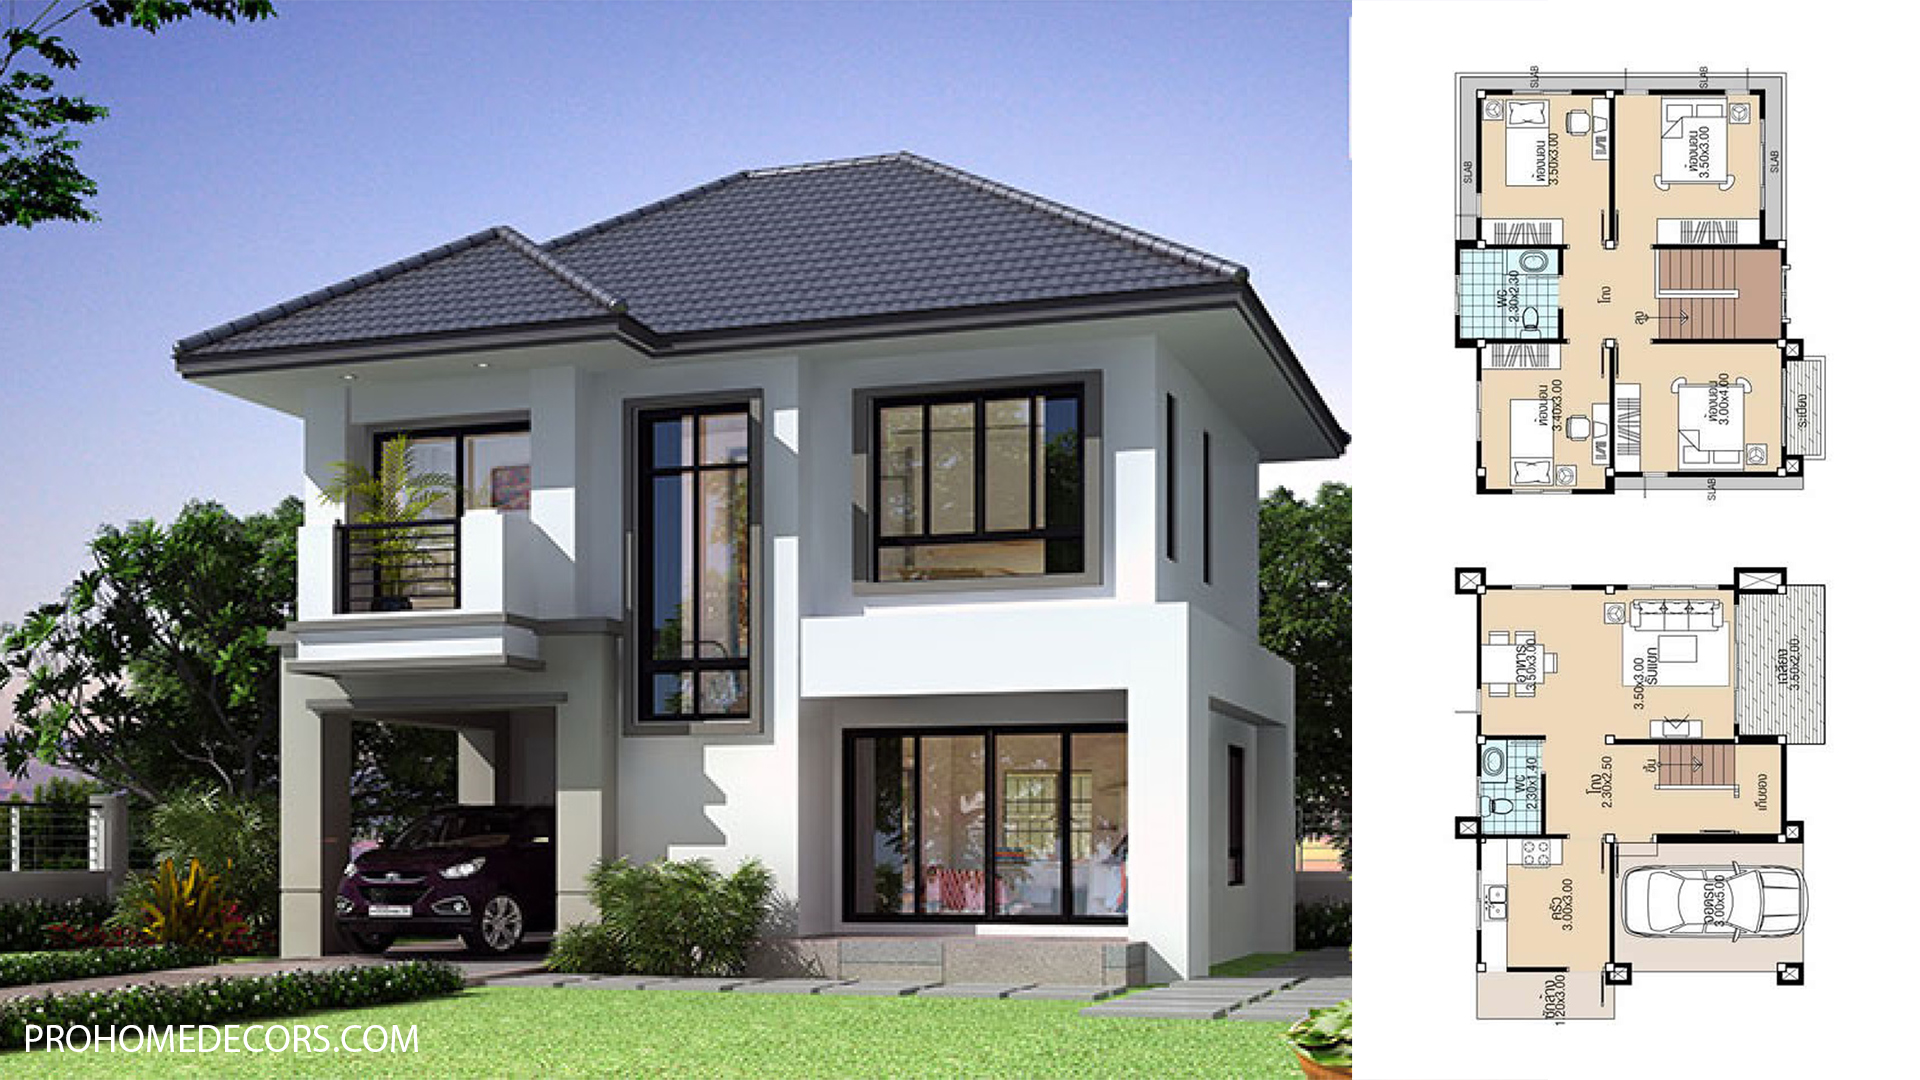 Simple House Plans 8.8x8 with 4 Bedrooms - Pro Home DecorS